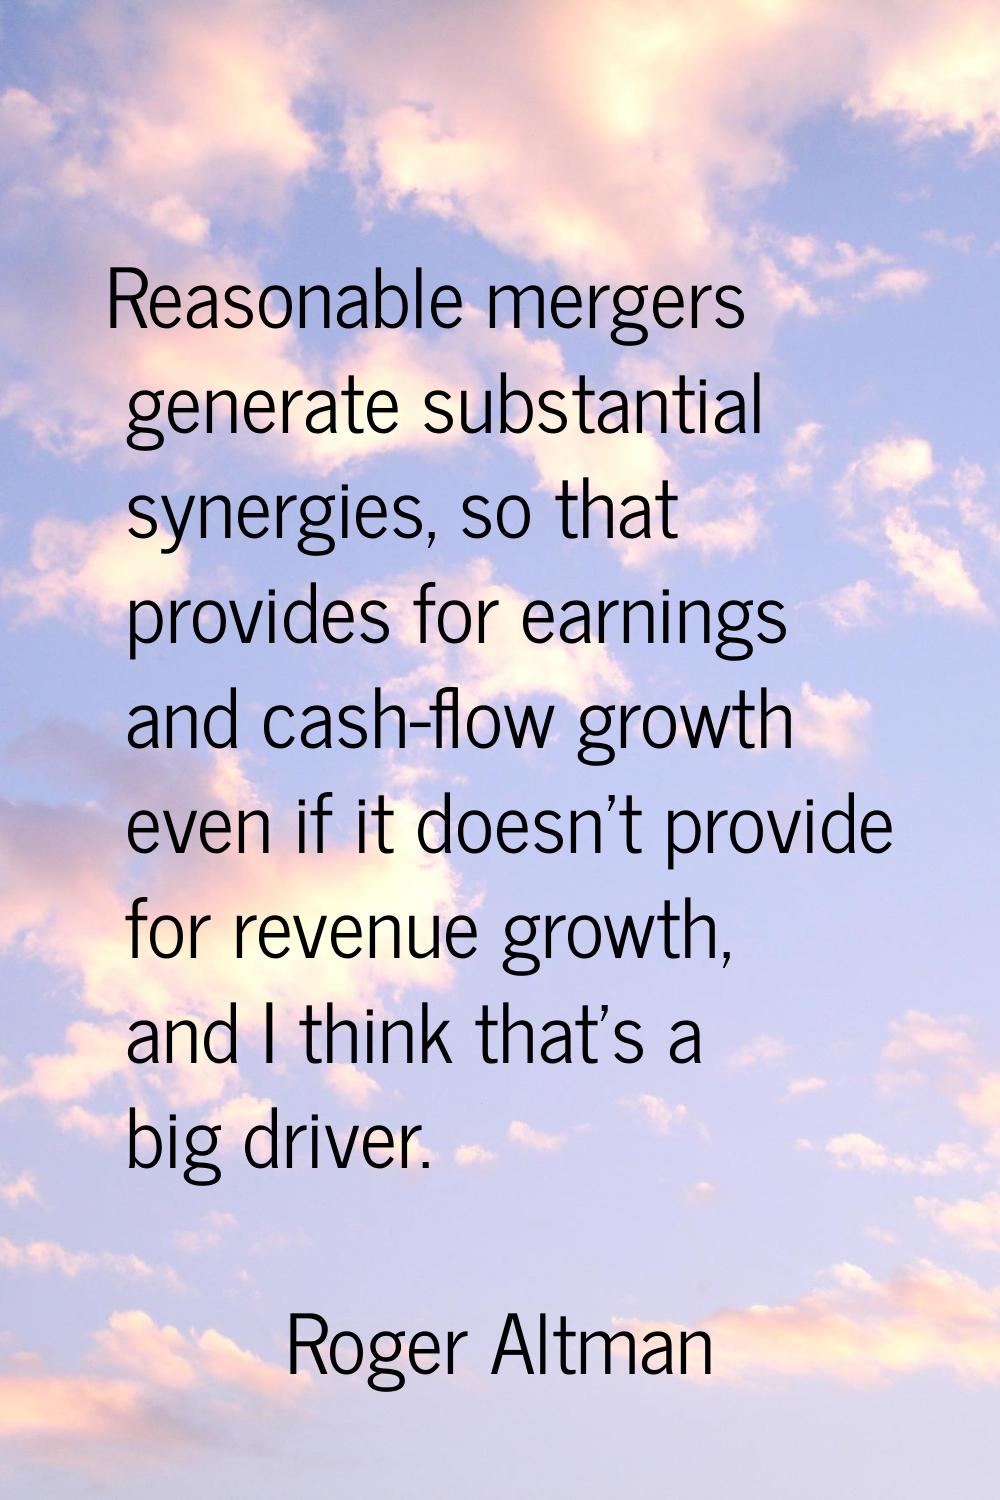 Reasonable mergers generate substantial synergies, so that provides for earnings and cash-flow grow